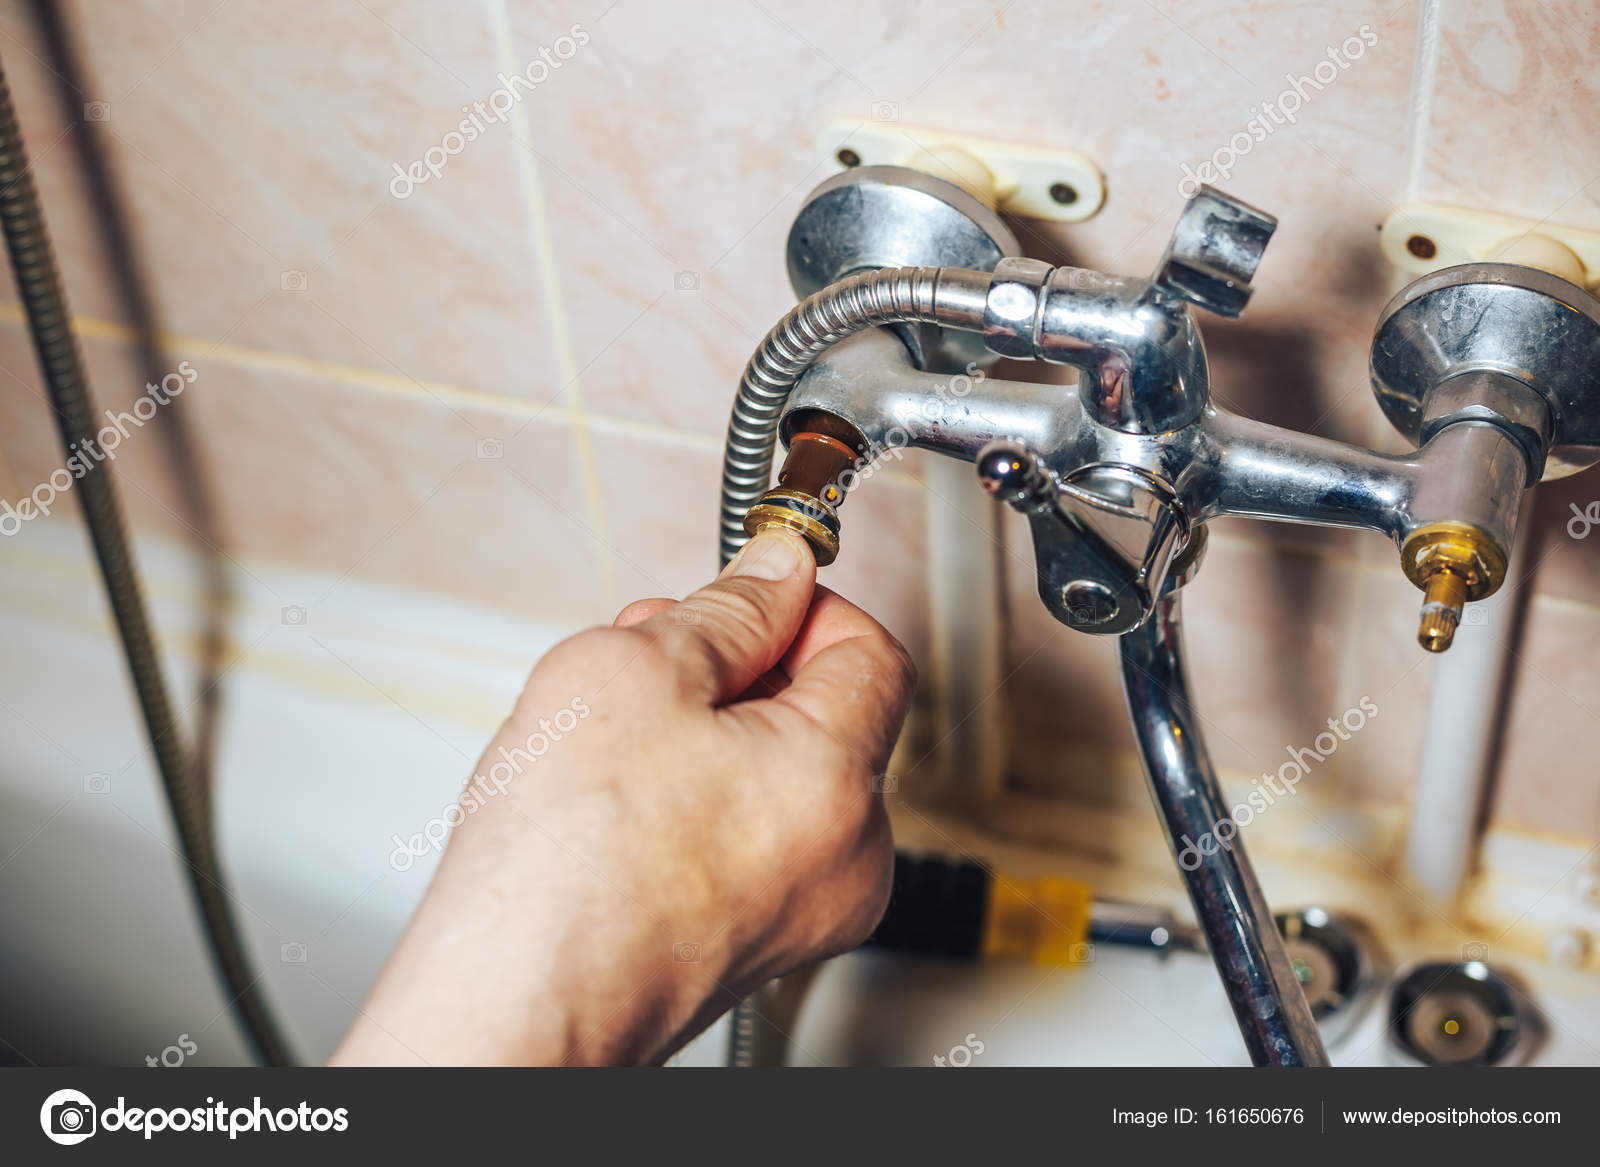 Man Repair And Fixing Leaky Old Faucet In Bathroom Stock Photo